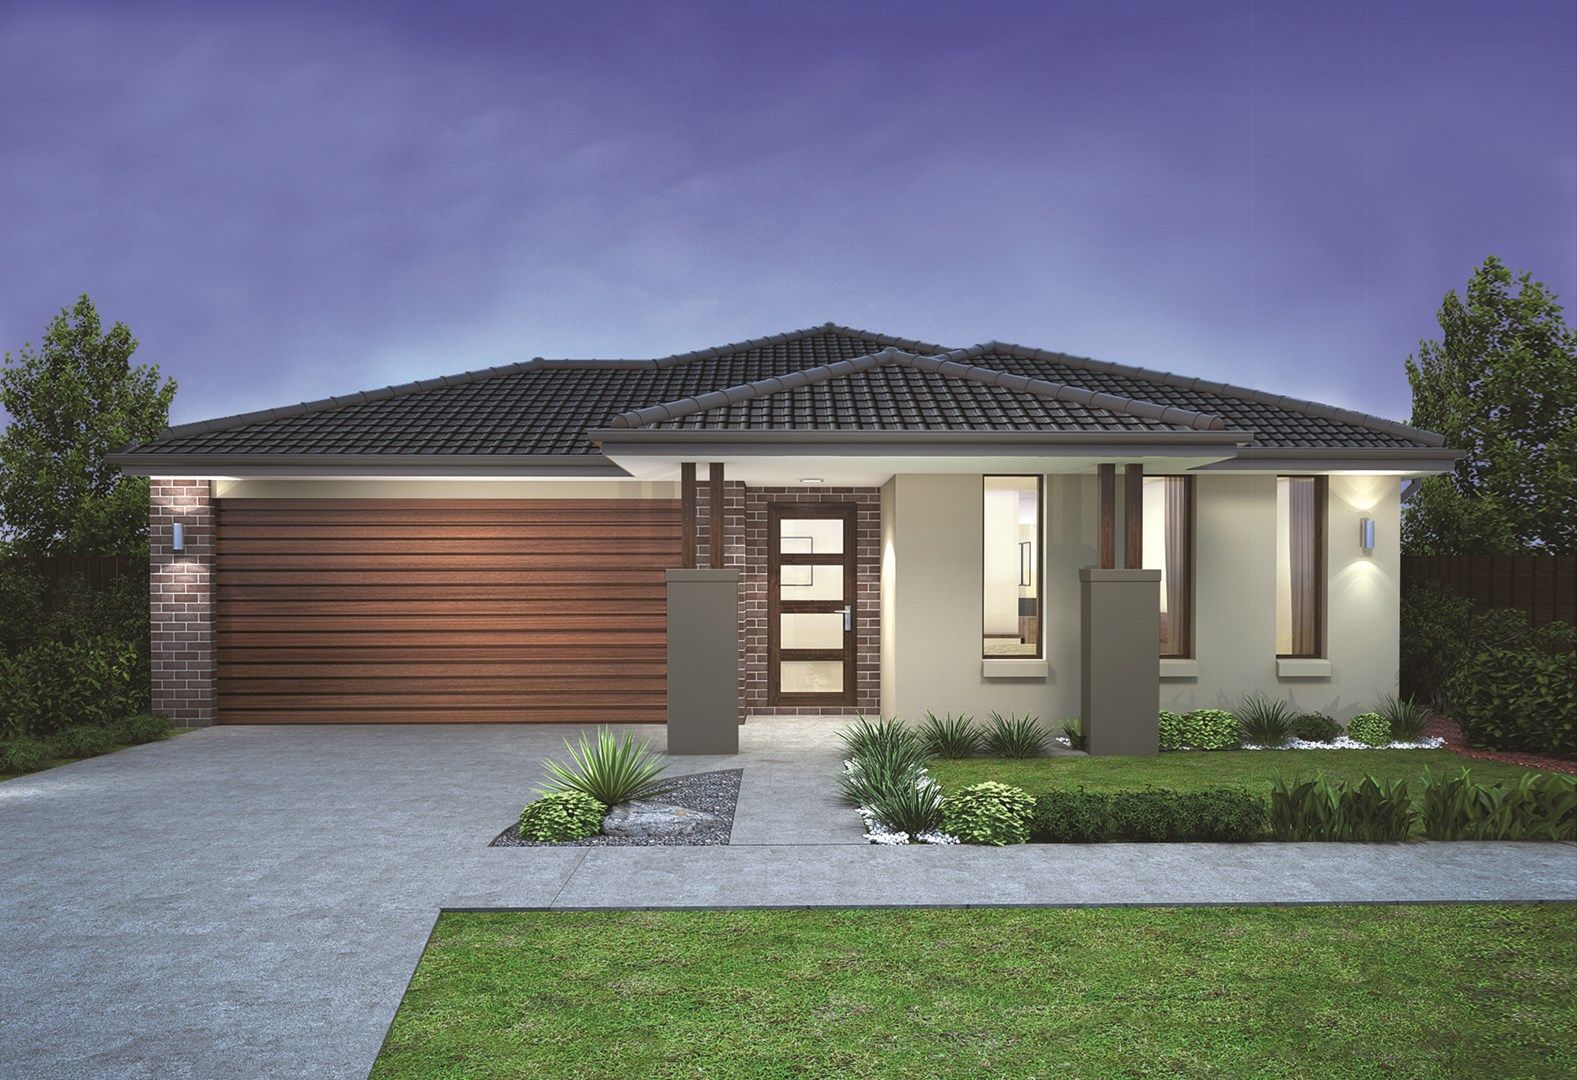 4 bedrooms New House & Land in Lot 558 Taylors Run Estate FRASER RISE VIC, 3336